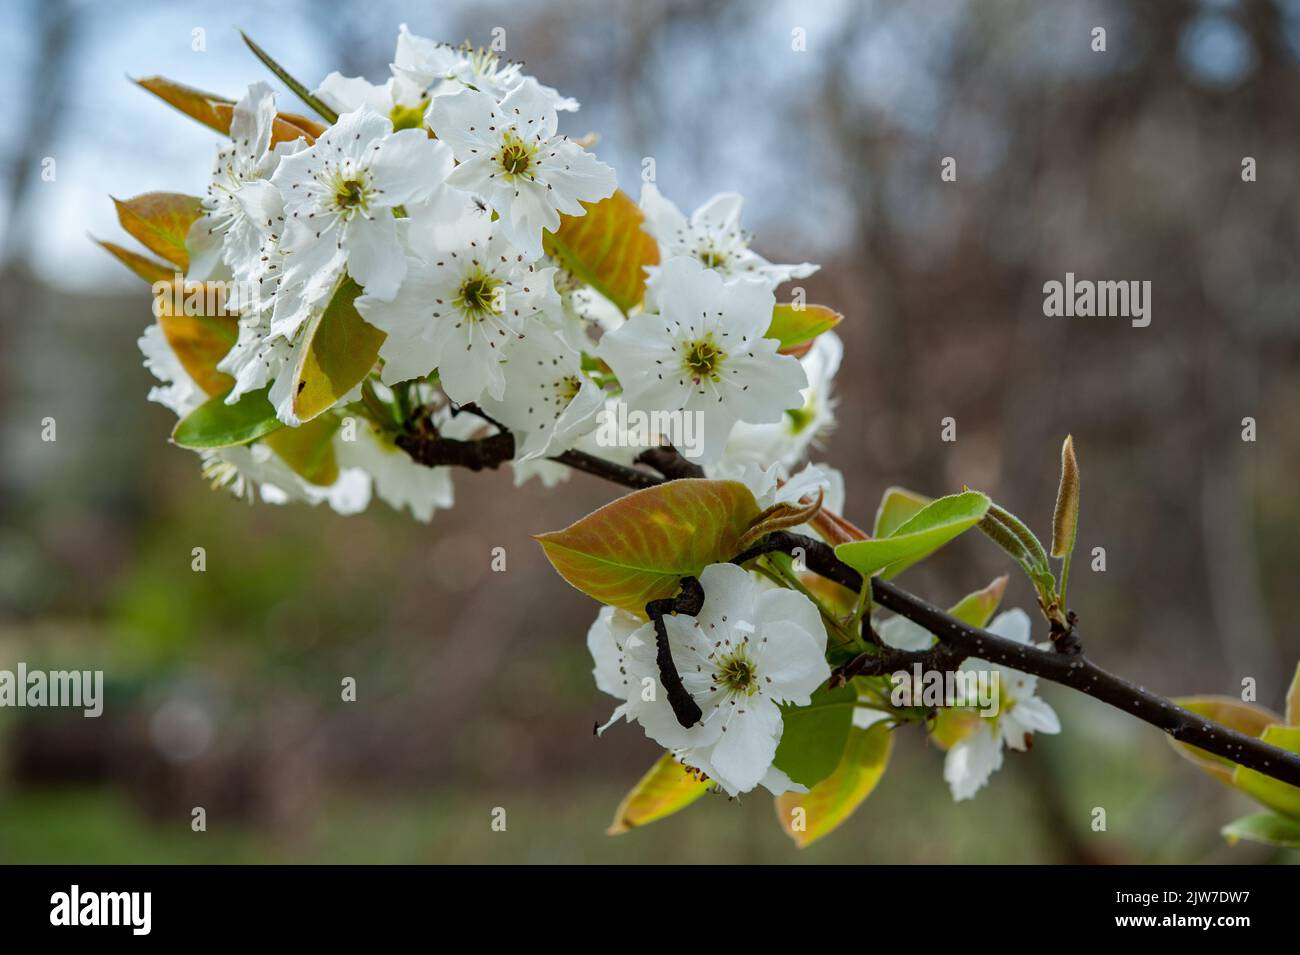 Pyrus pyrifolia (Nashi) is a fruit tree belonging to the Rosaceae family. Stock Photo